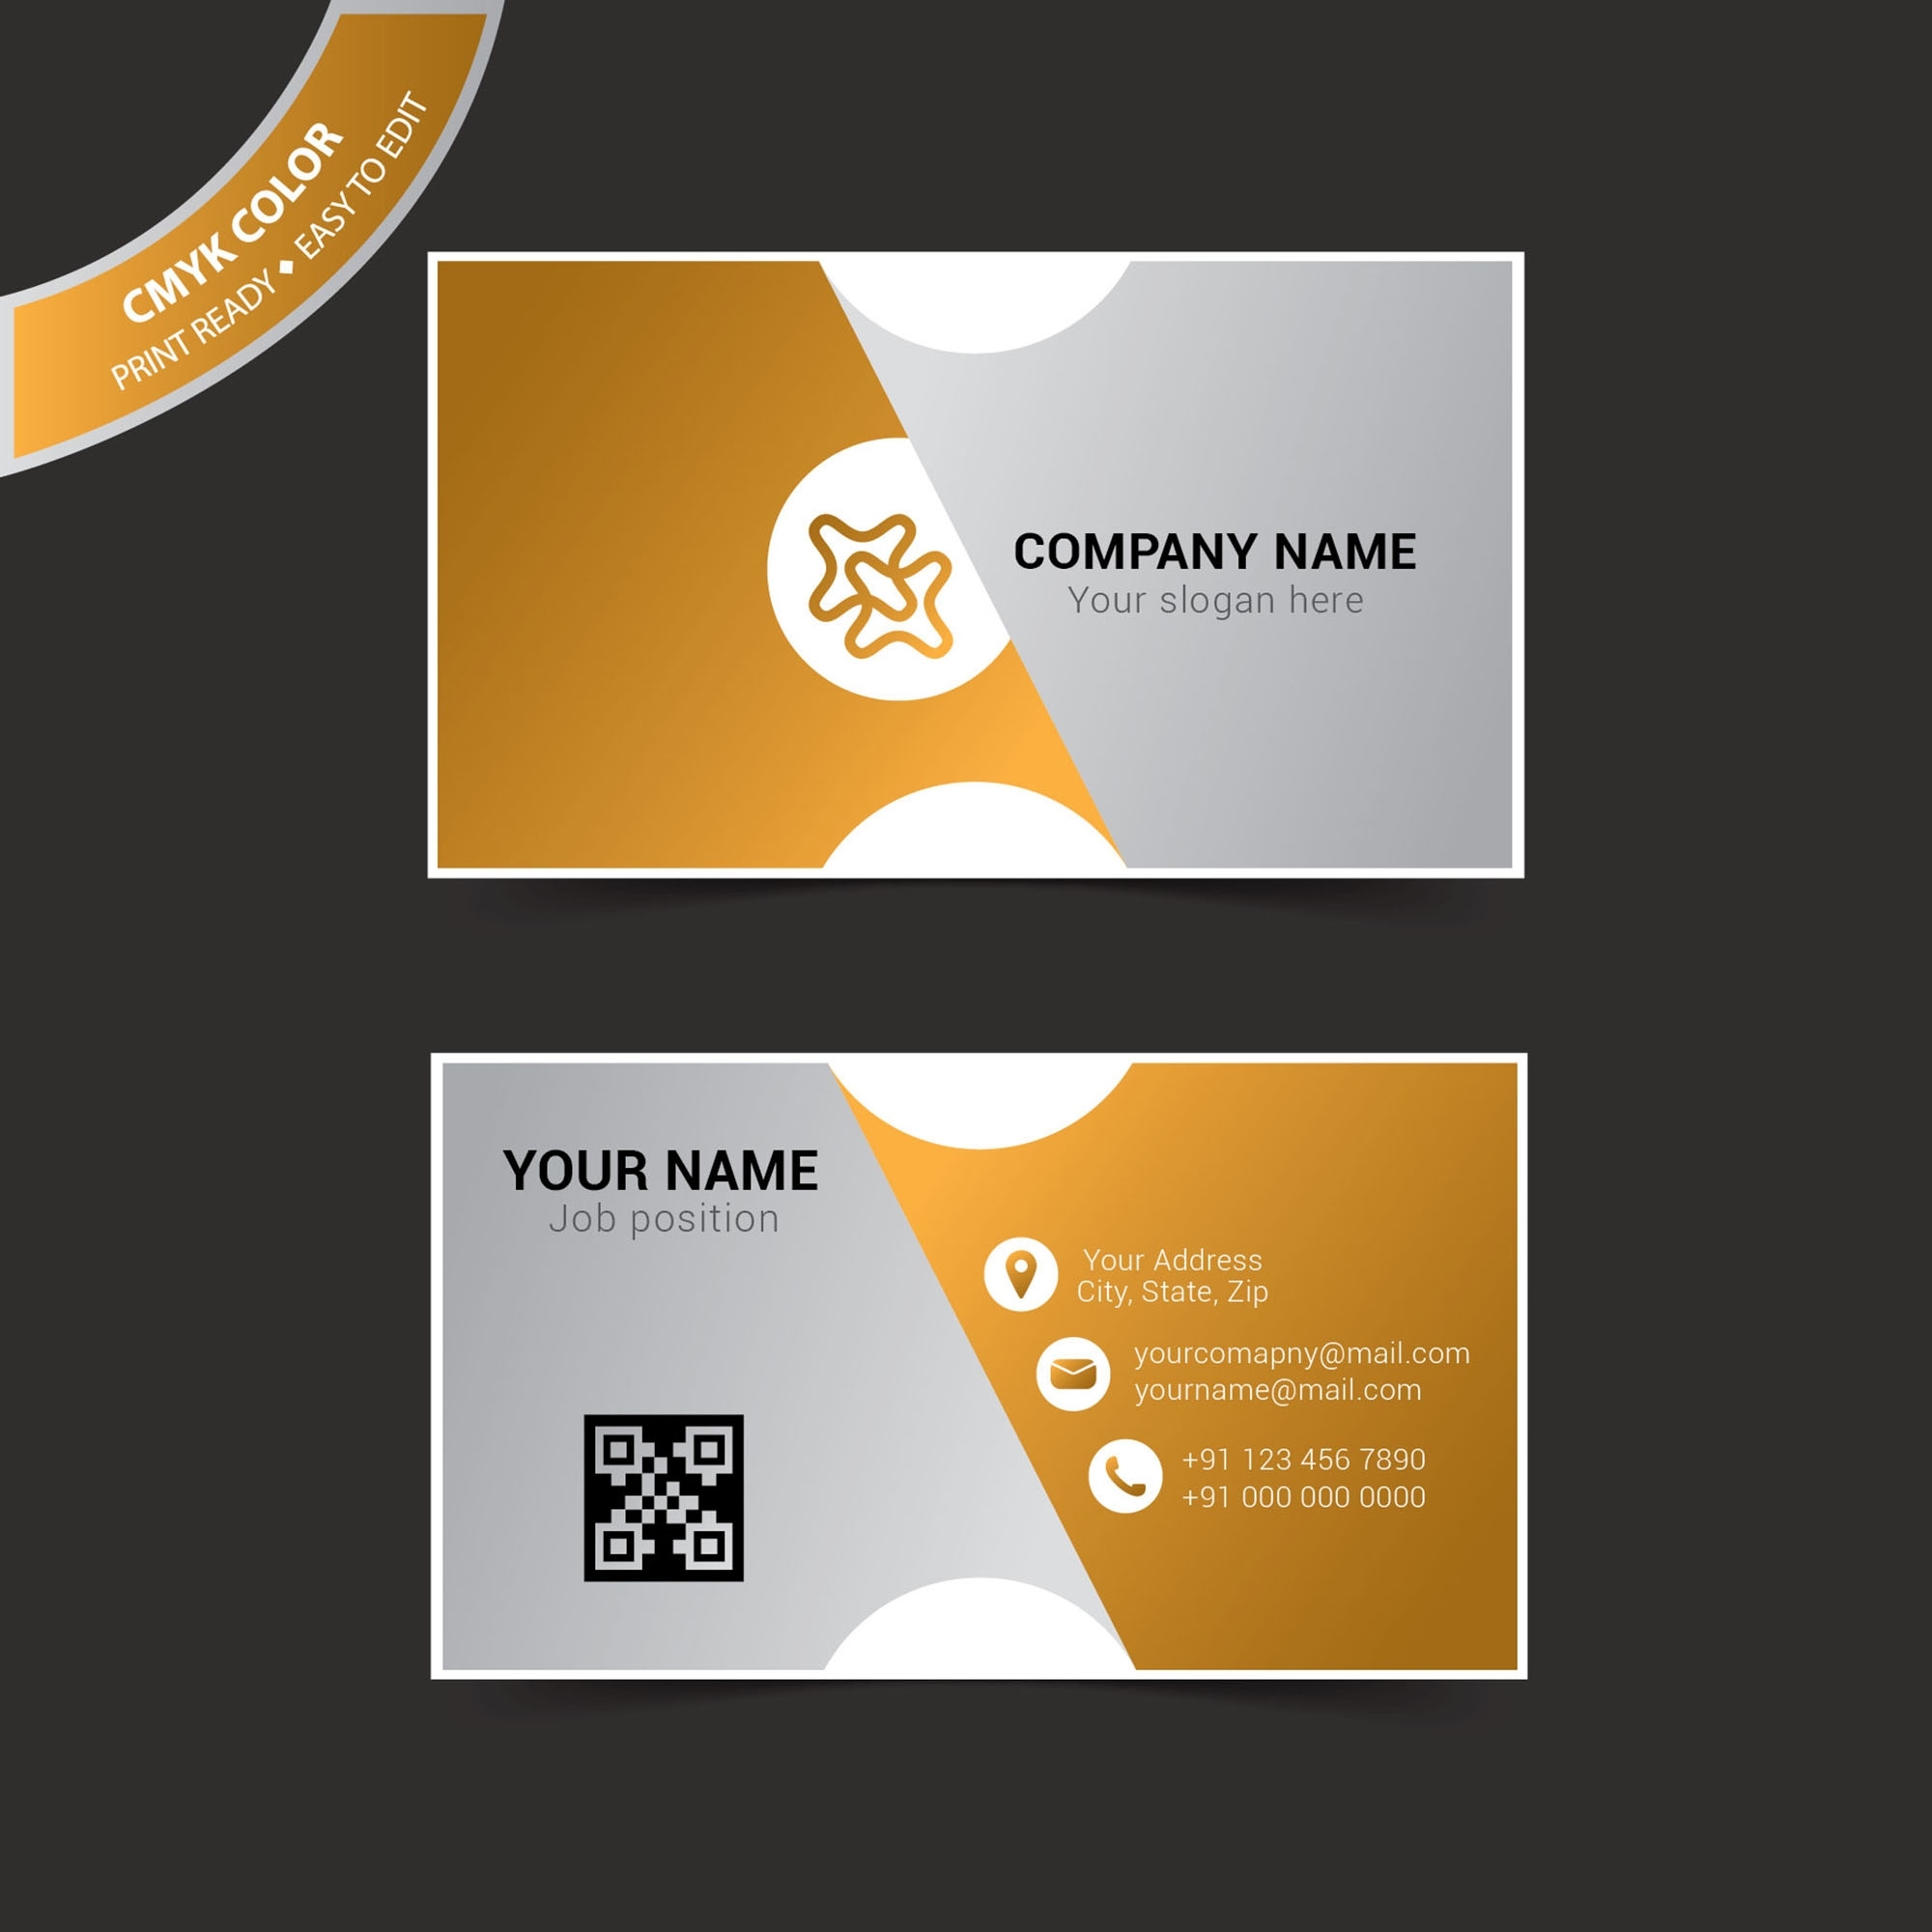 Business Card Template Illustrator - Free Vector - Wisxi For Web Design Business Cards Templates